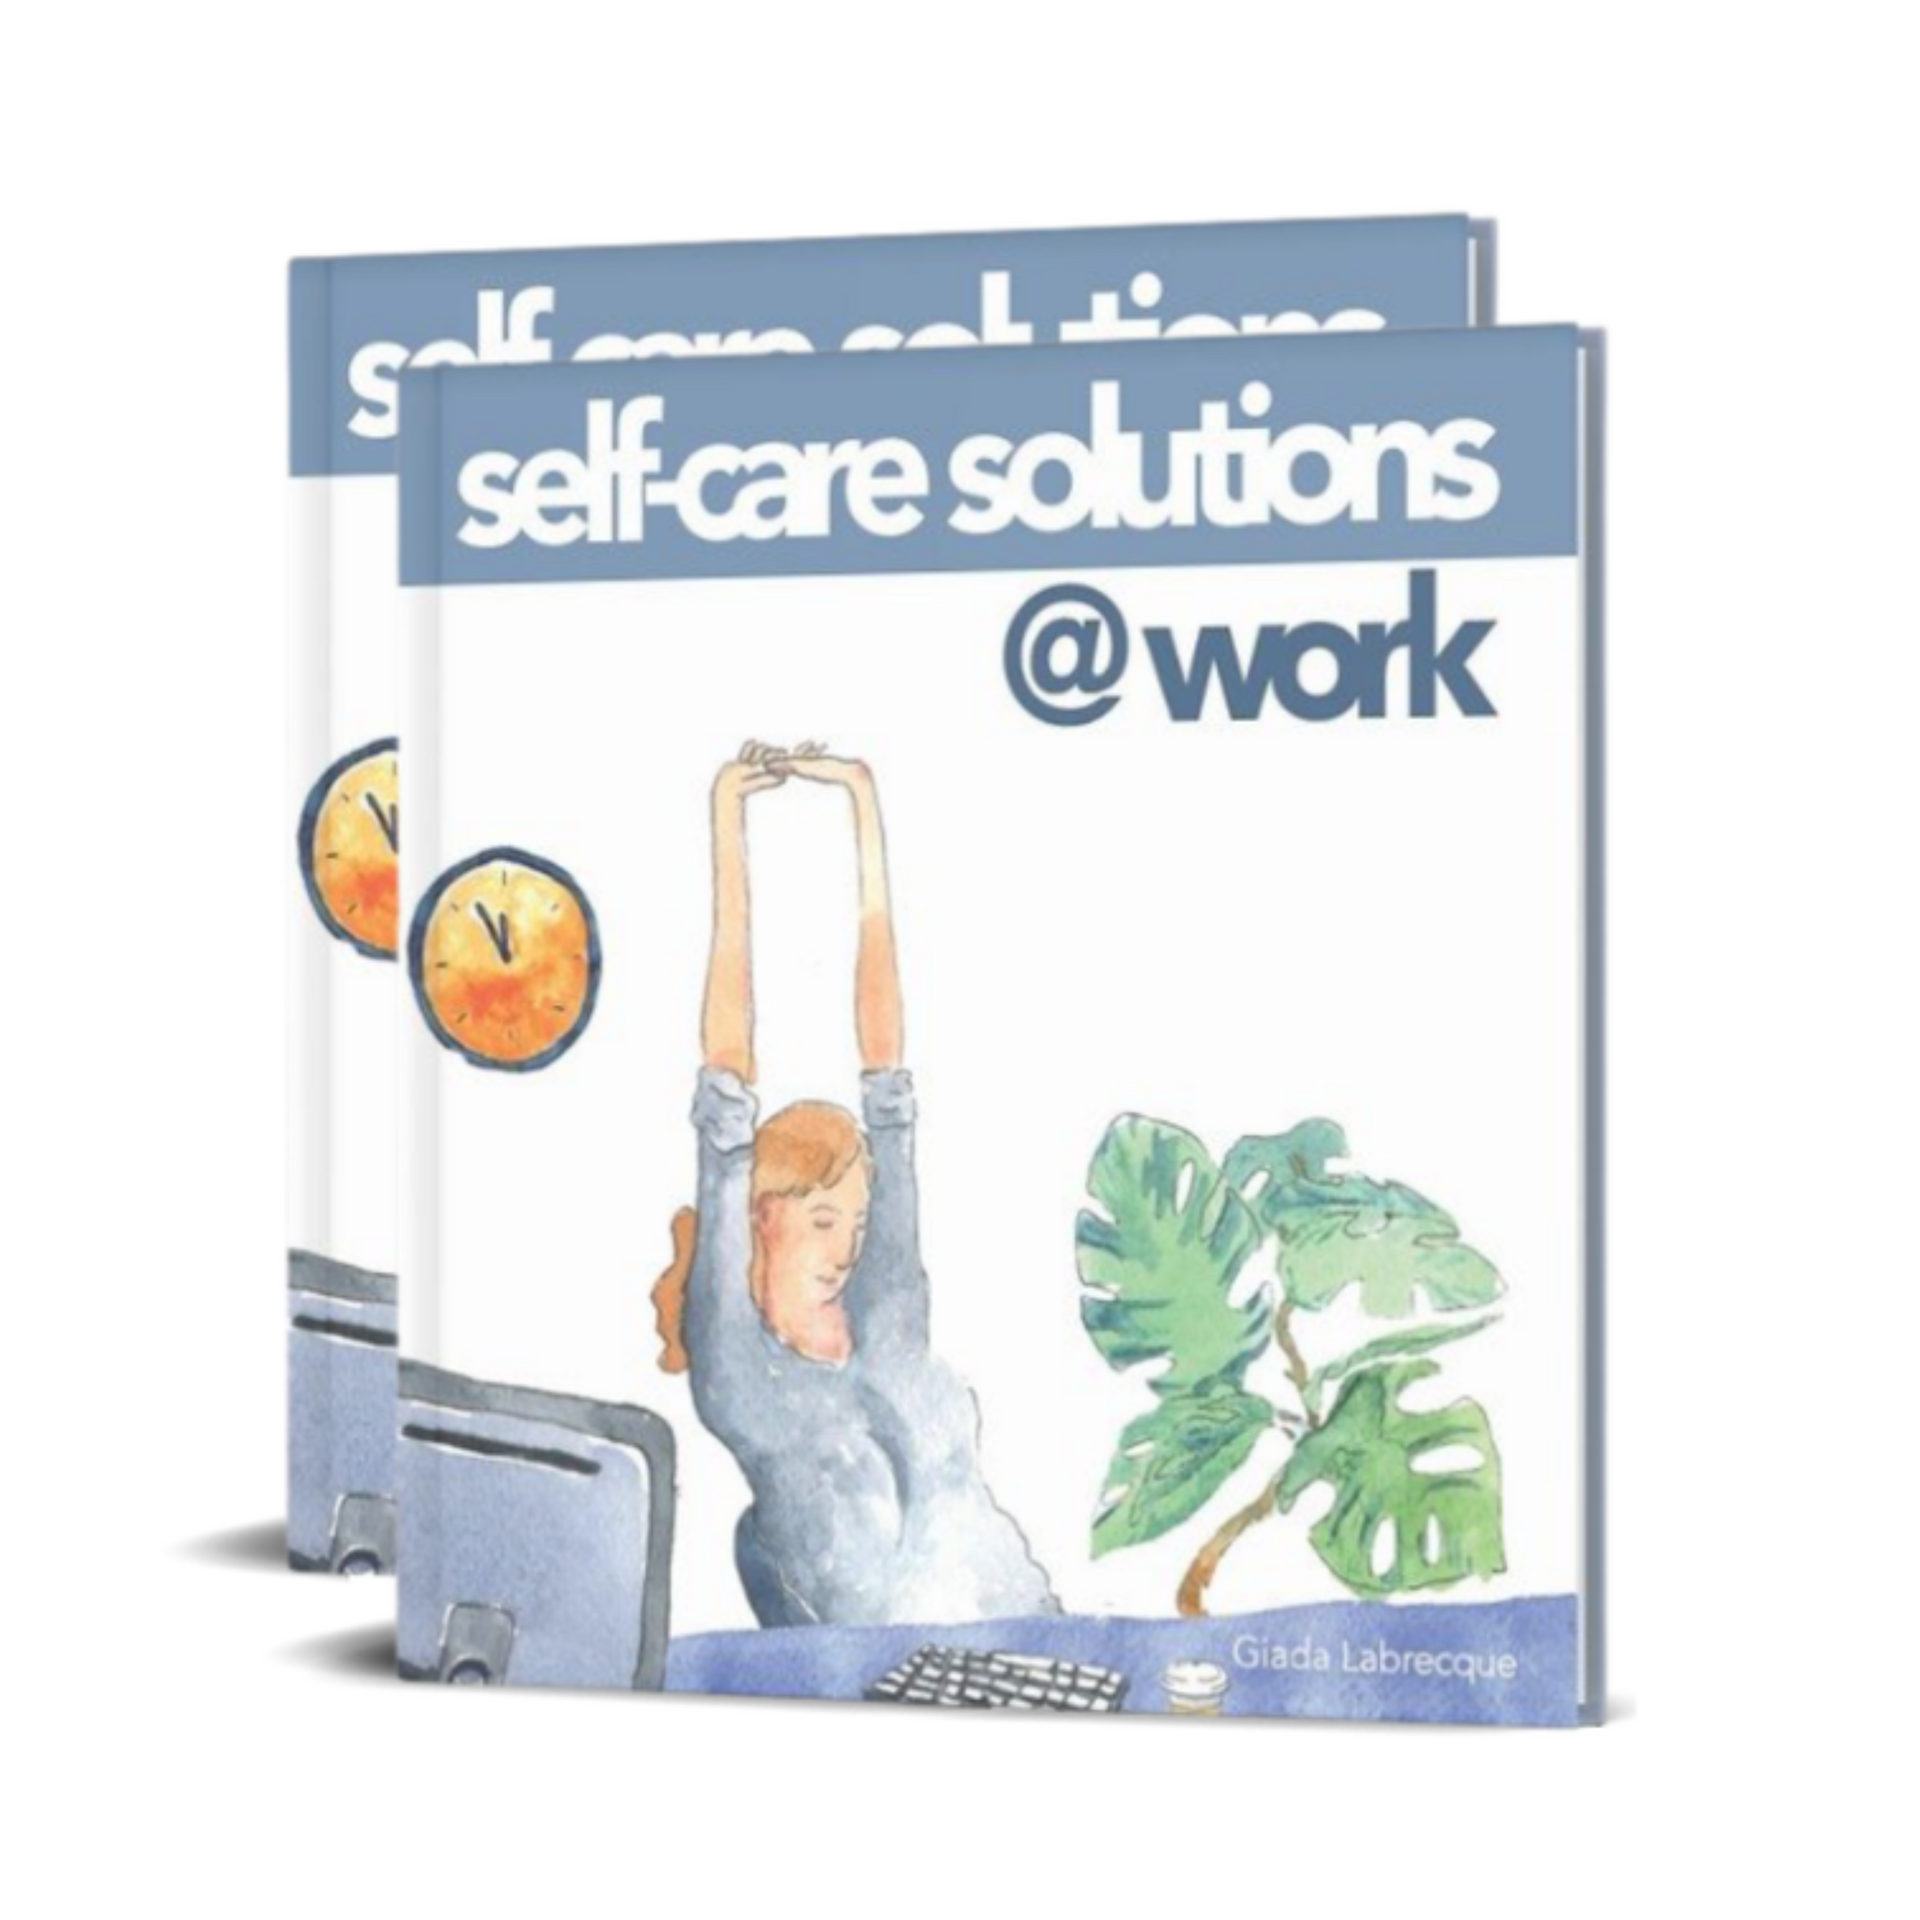 Self-Care Solutions at Work book by Giada Labrecque